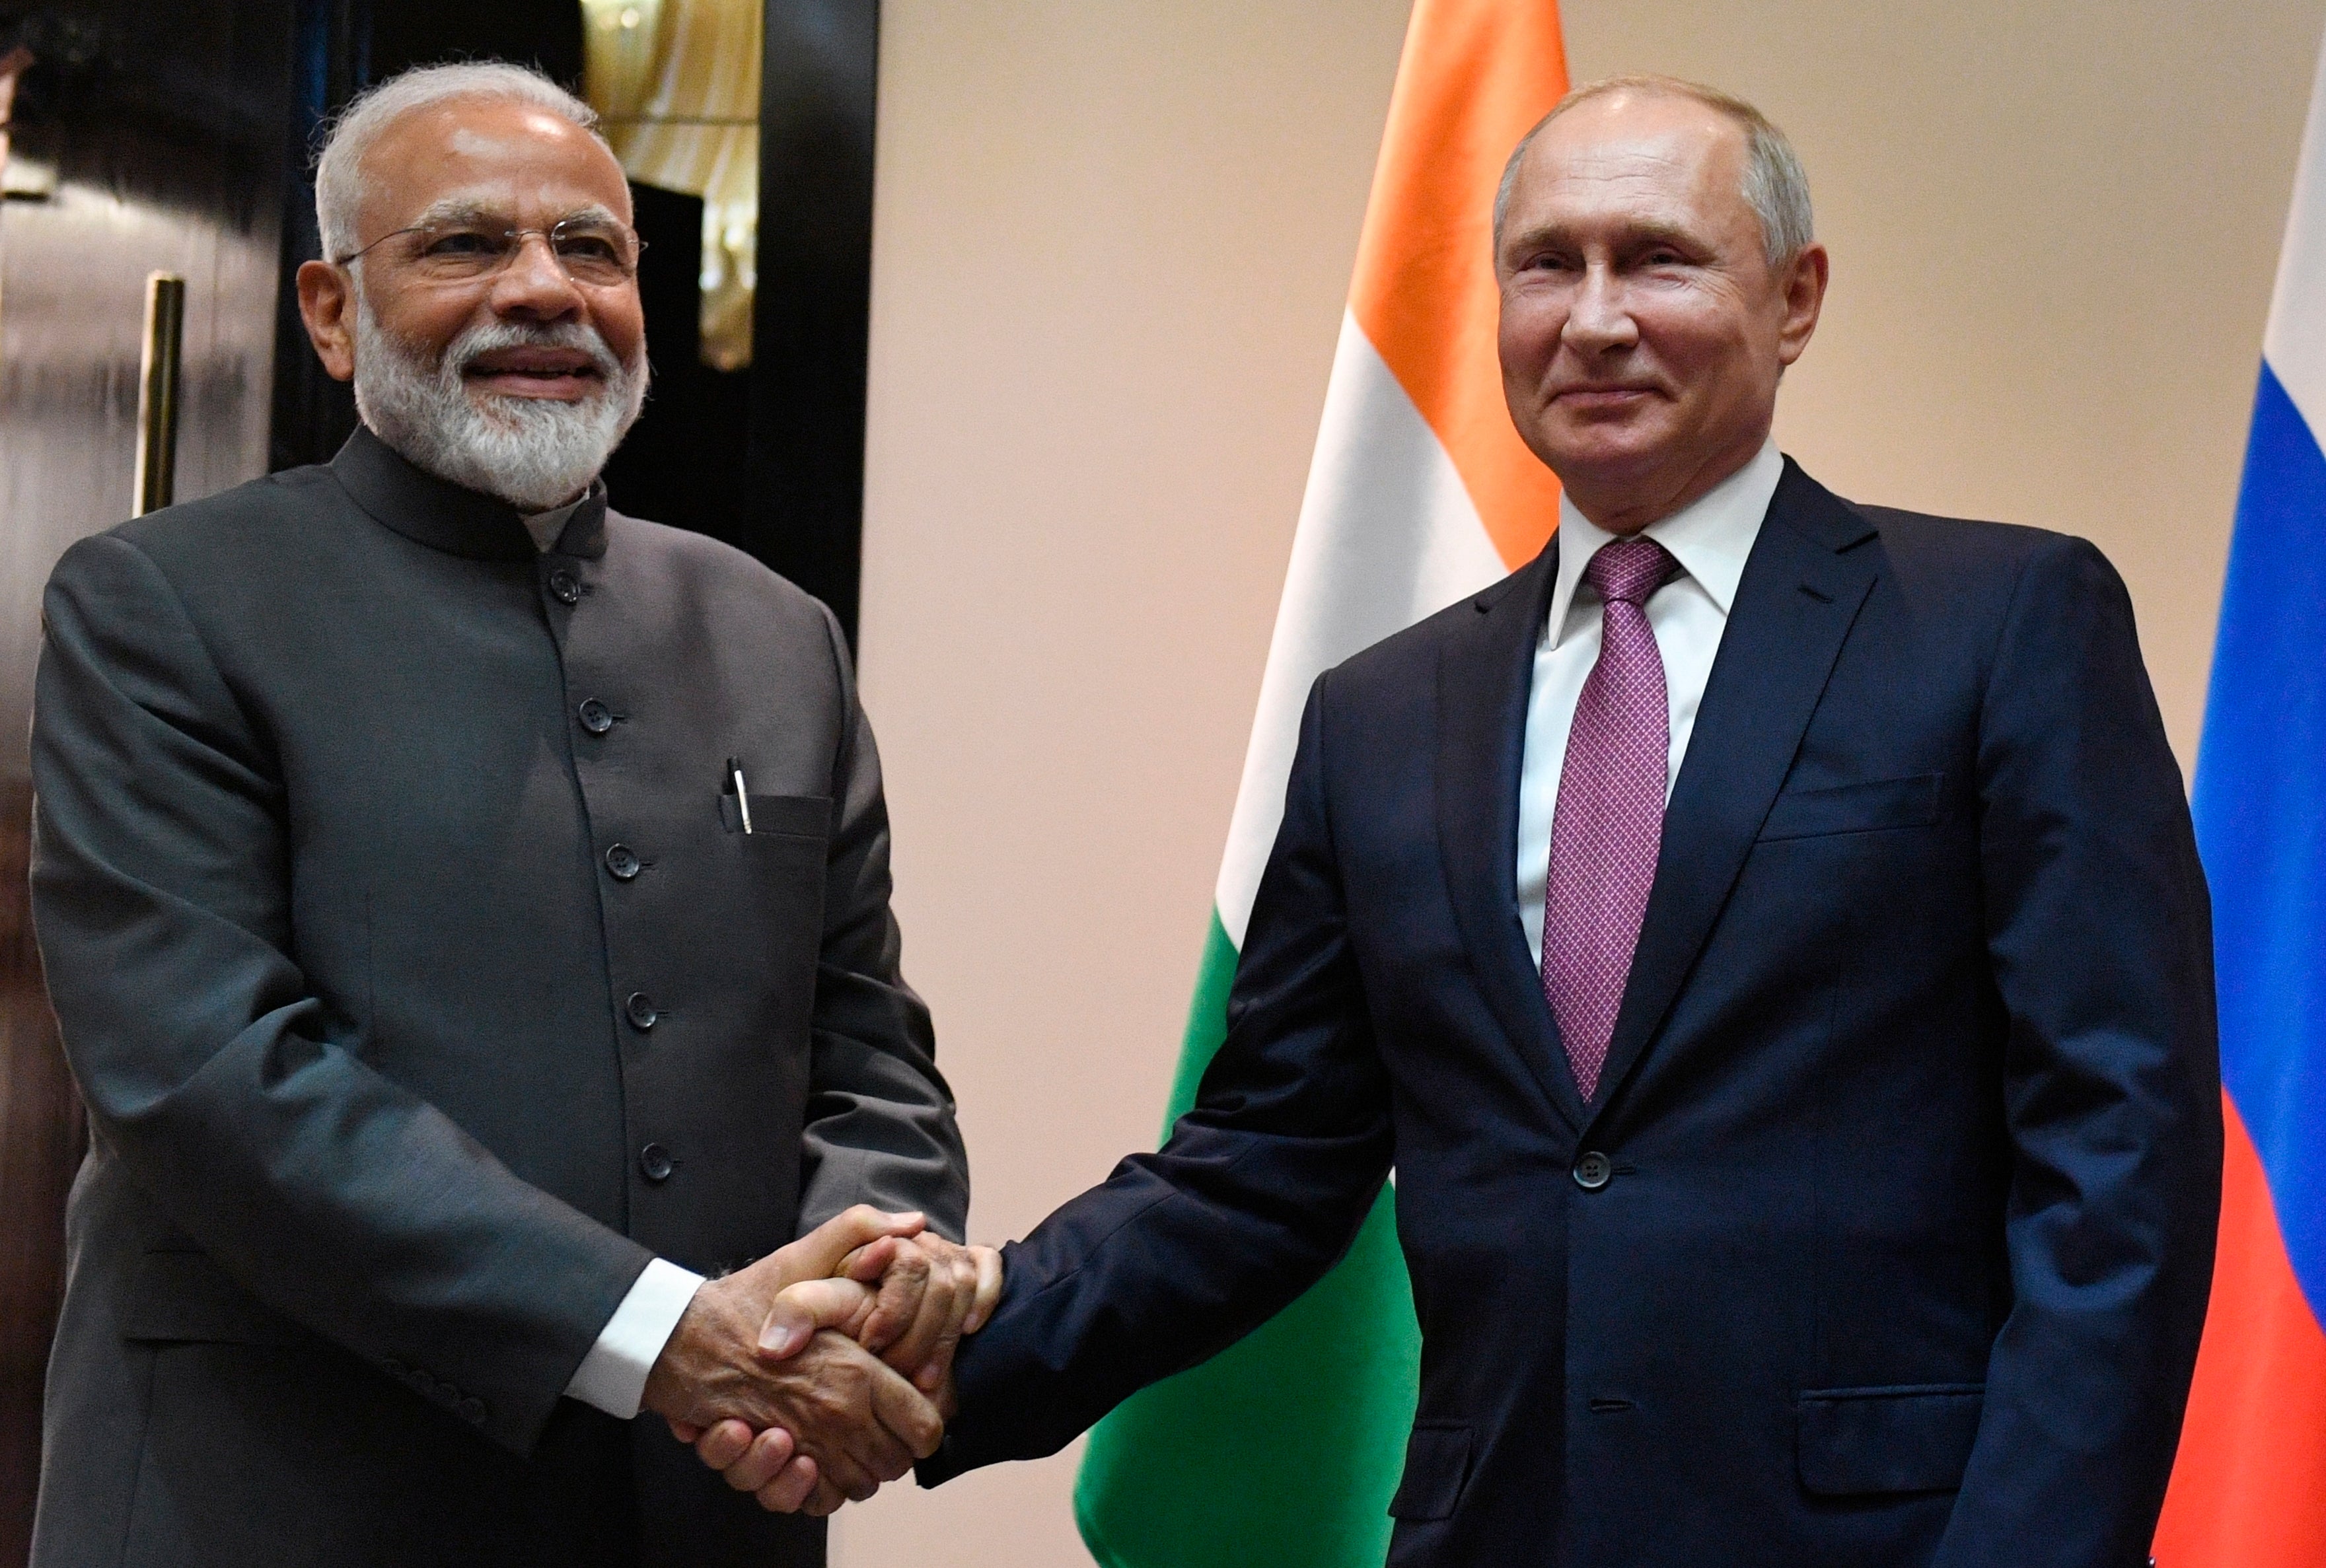 Russian President Vladimir Putin, right, and Indian Prime Minister Narendra Modi pose for a photo in 2019